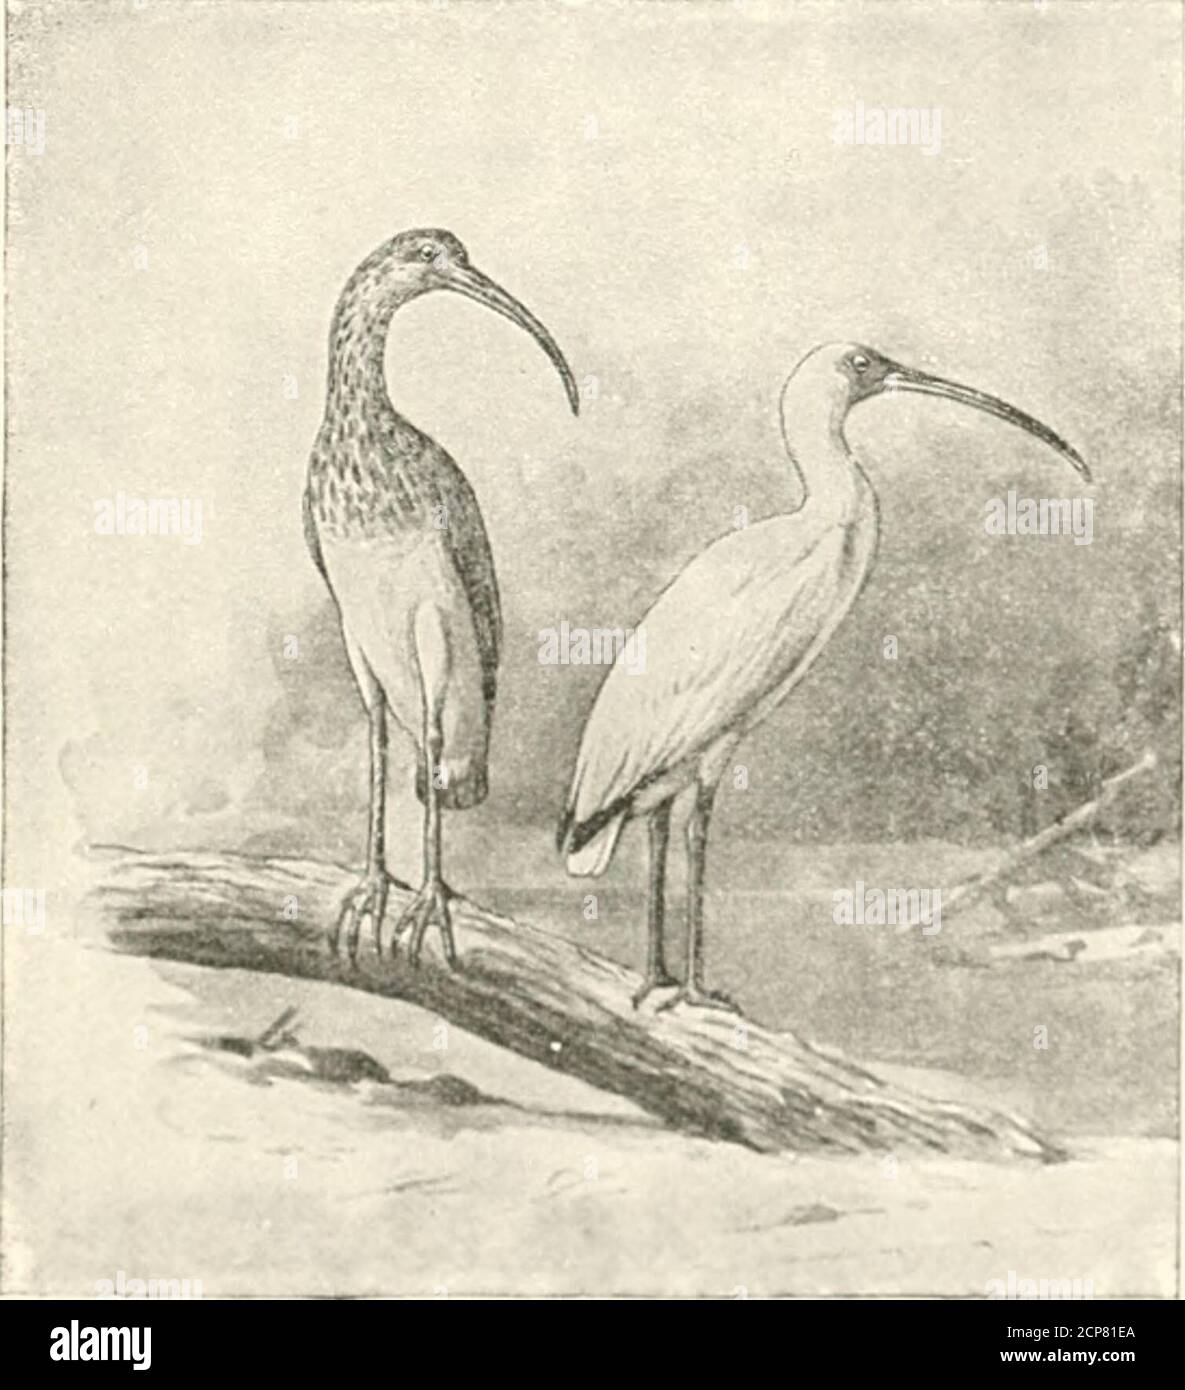 . The birds of eastern North America known to occur east of the nineteenth meridian .. . liill, tl:it, widened iiud rouuded at tip; general plumage, pink and white. AjaJH &lt;ij(tja. Roseate Spoonbill.See No. 139. Tlie Spoonbill may be roadil.y recognized by its peculiar bill. Although bv no meanscommon, it still occurs in some mimbers in tlie swamps of southern Florida. FAMILY IBIDID.E. IBISES. 87 FAMILY IBIDID/E. Ibises. Bill, long, rather slender, and decidedly curved downward; tarsus,always less than five inches long; toes, four, all on the same level, no comb=like edyje on side of middle Stock Photo